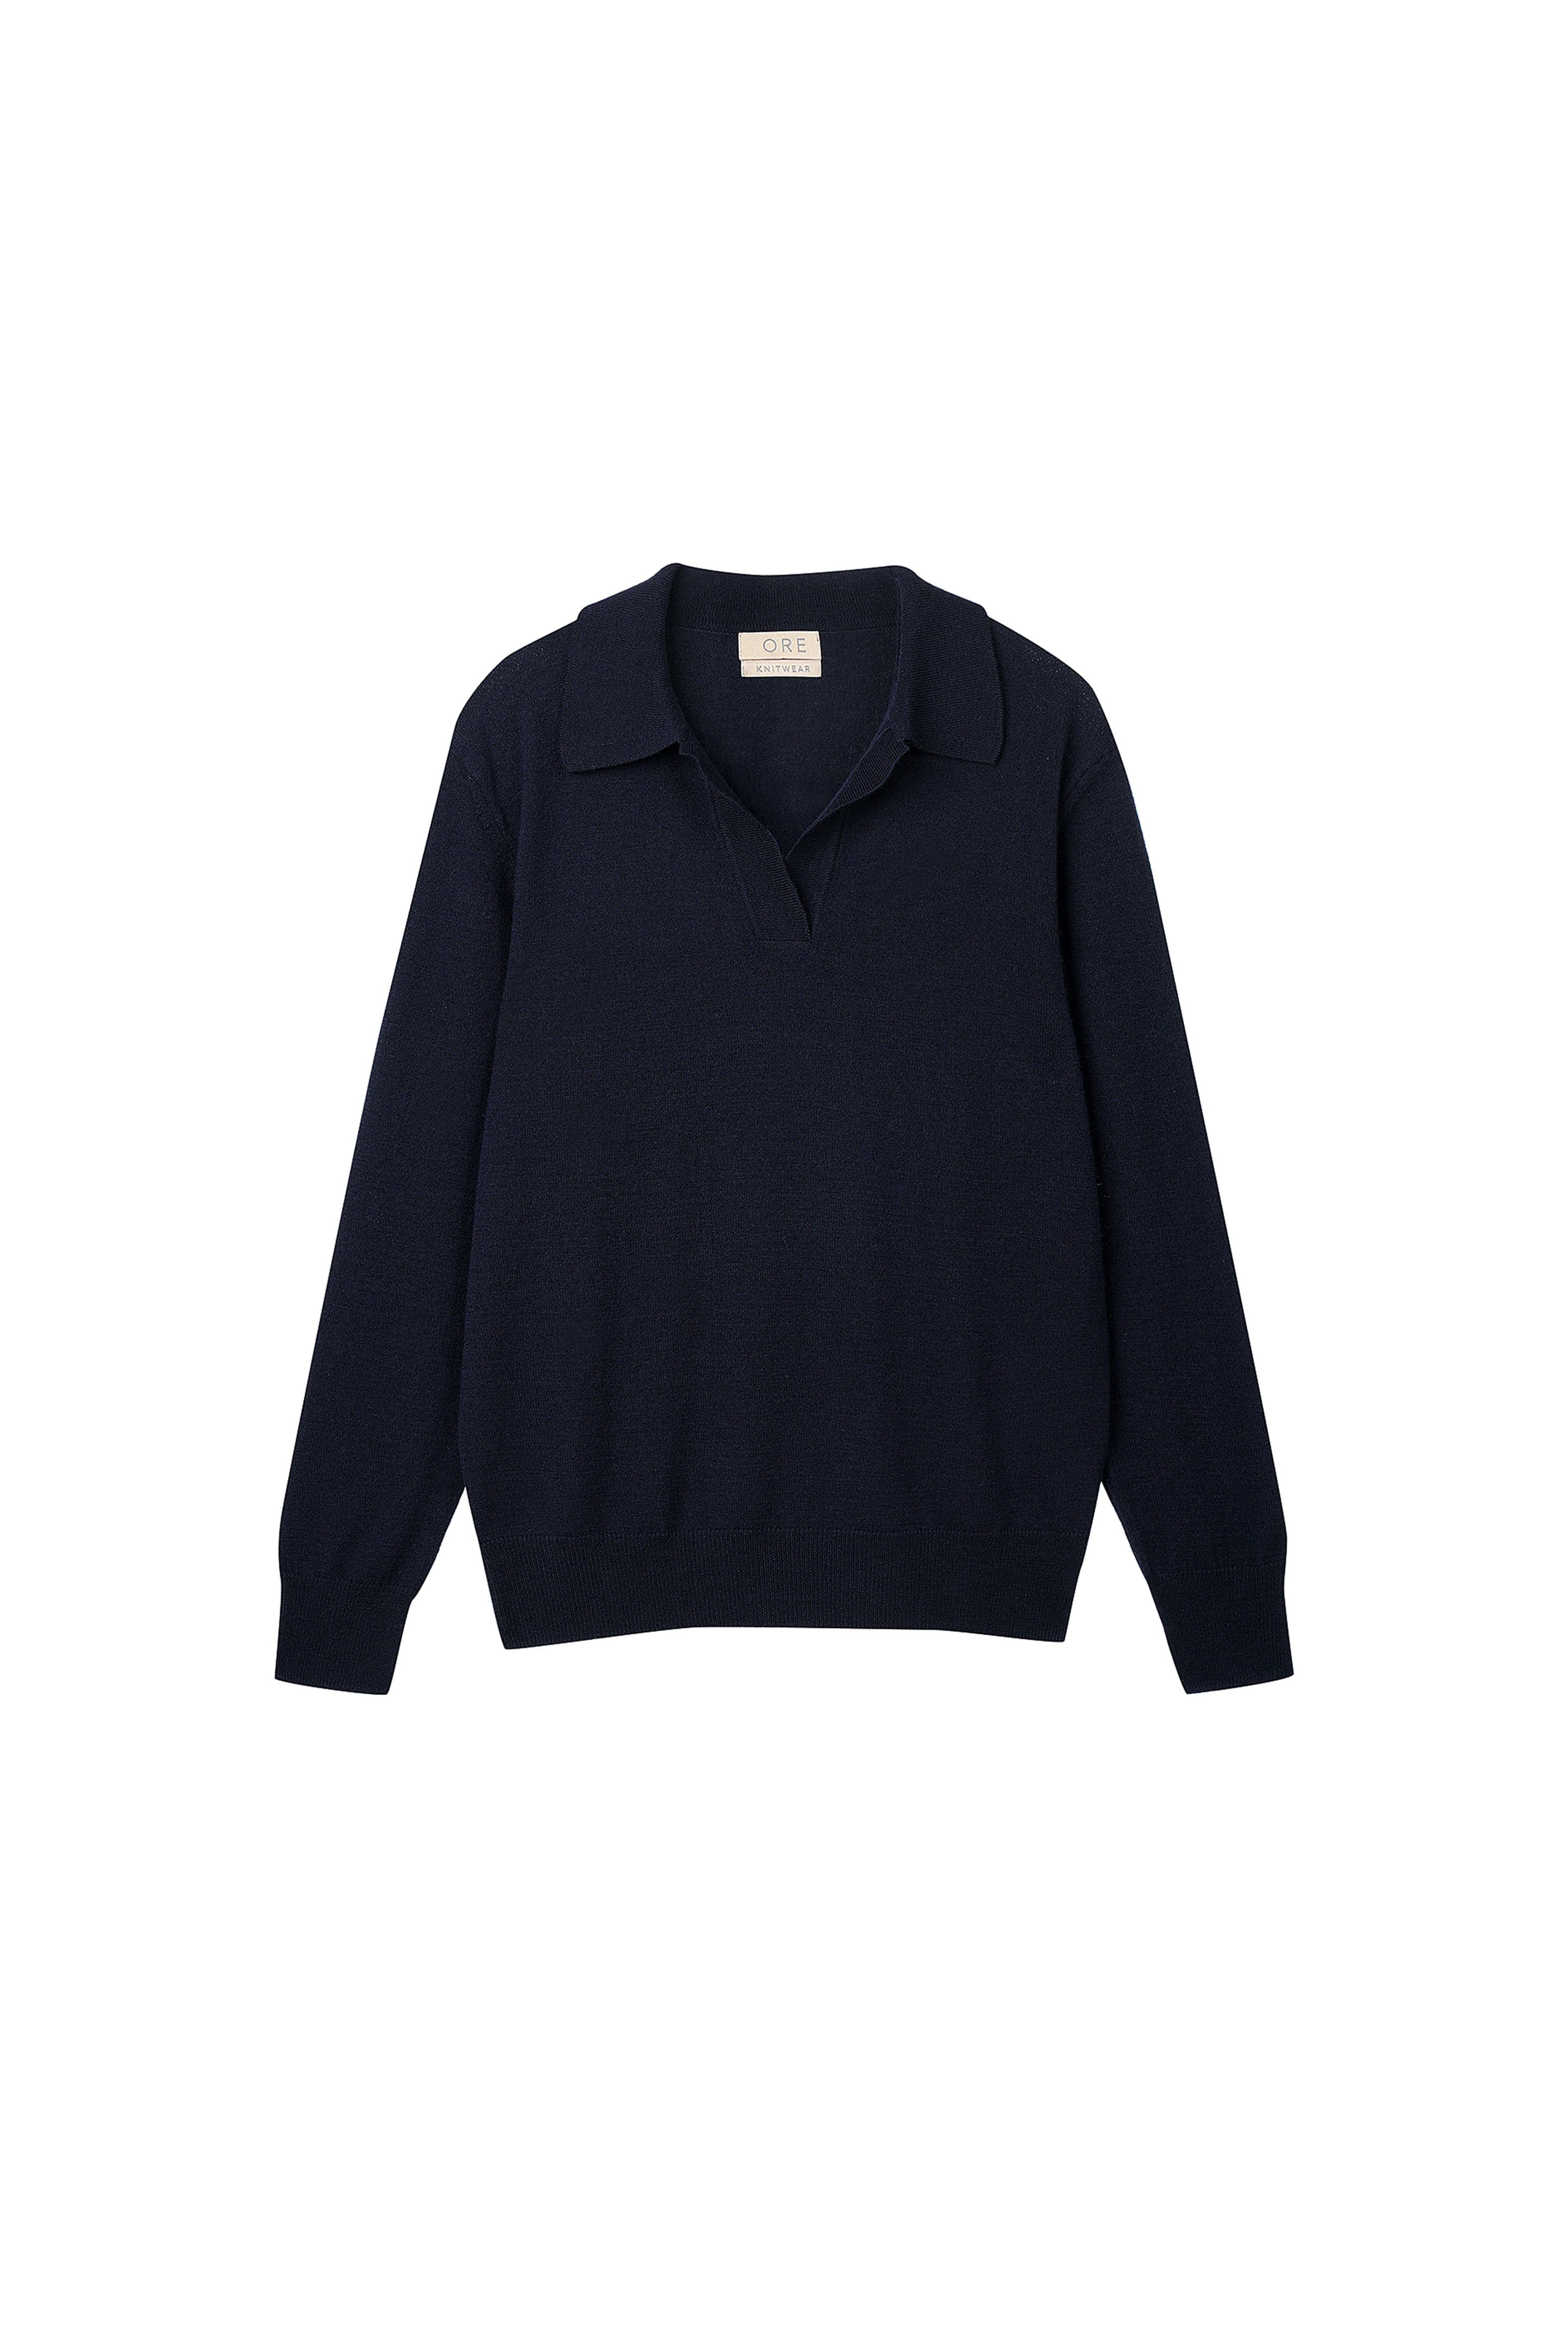 Knitted Collar Pull-over Navy